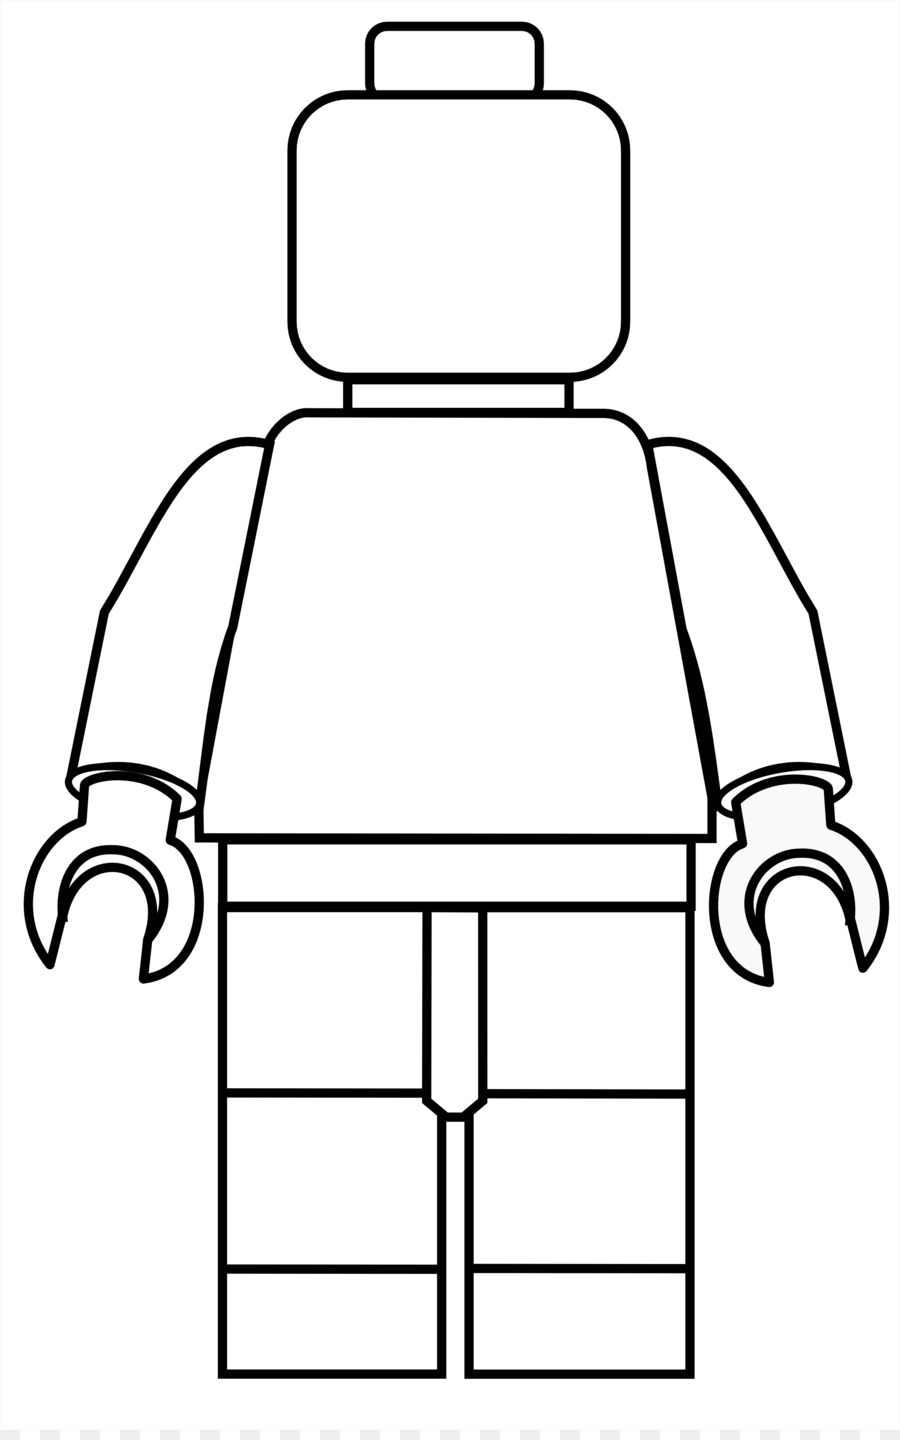 Lego minifigure Template Lego Creator Clip art - Blank Person Outline png download - 2109*3352 - Free Transparent Lego png Download.